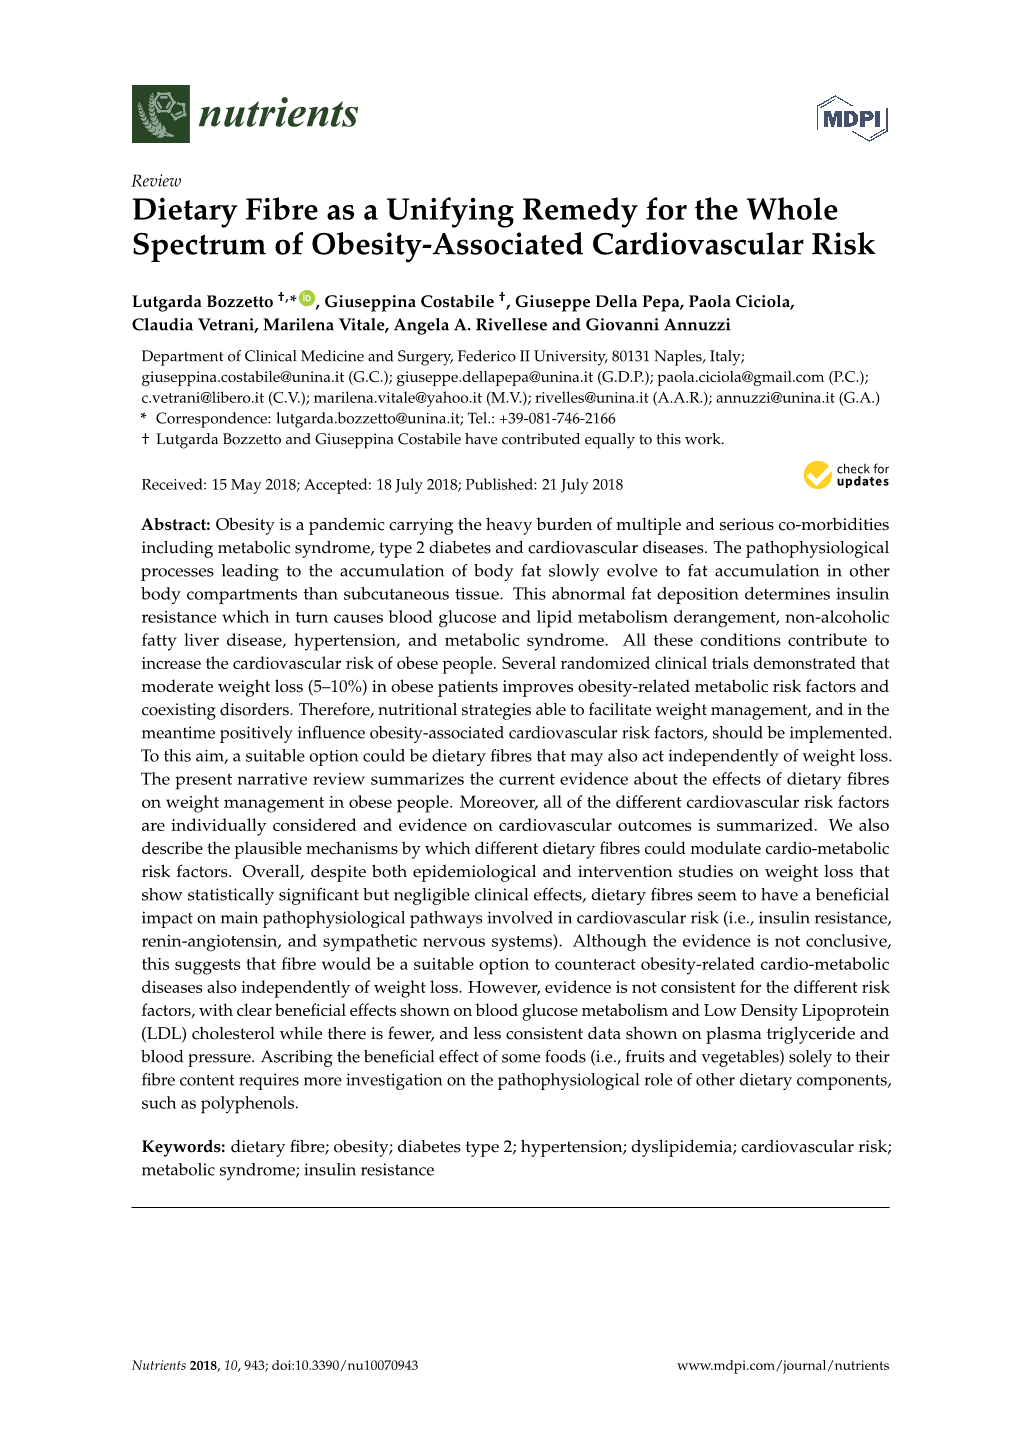 Dietary Fibre As a Unifying Remedy for the Whole Spectrum of Obesity-Associated Cardiovascular Risk